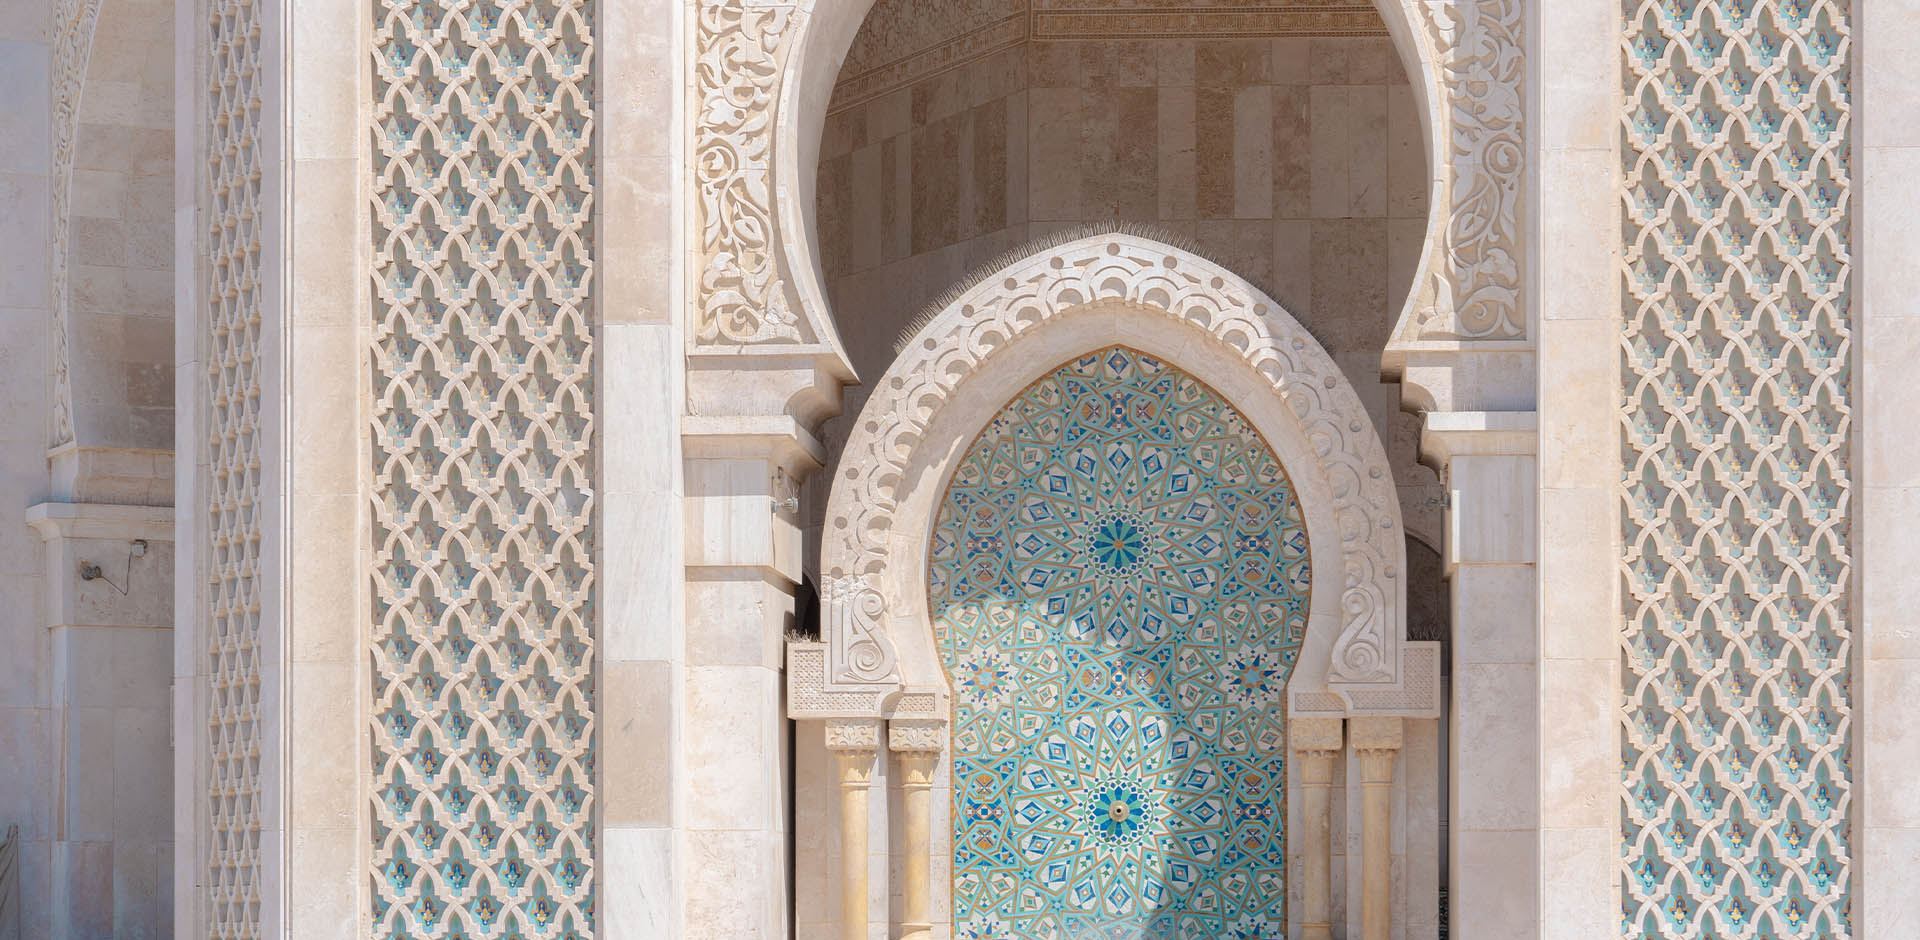 Architectural detail of turquoise tiles and ornate carved stone